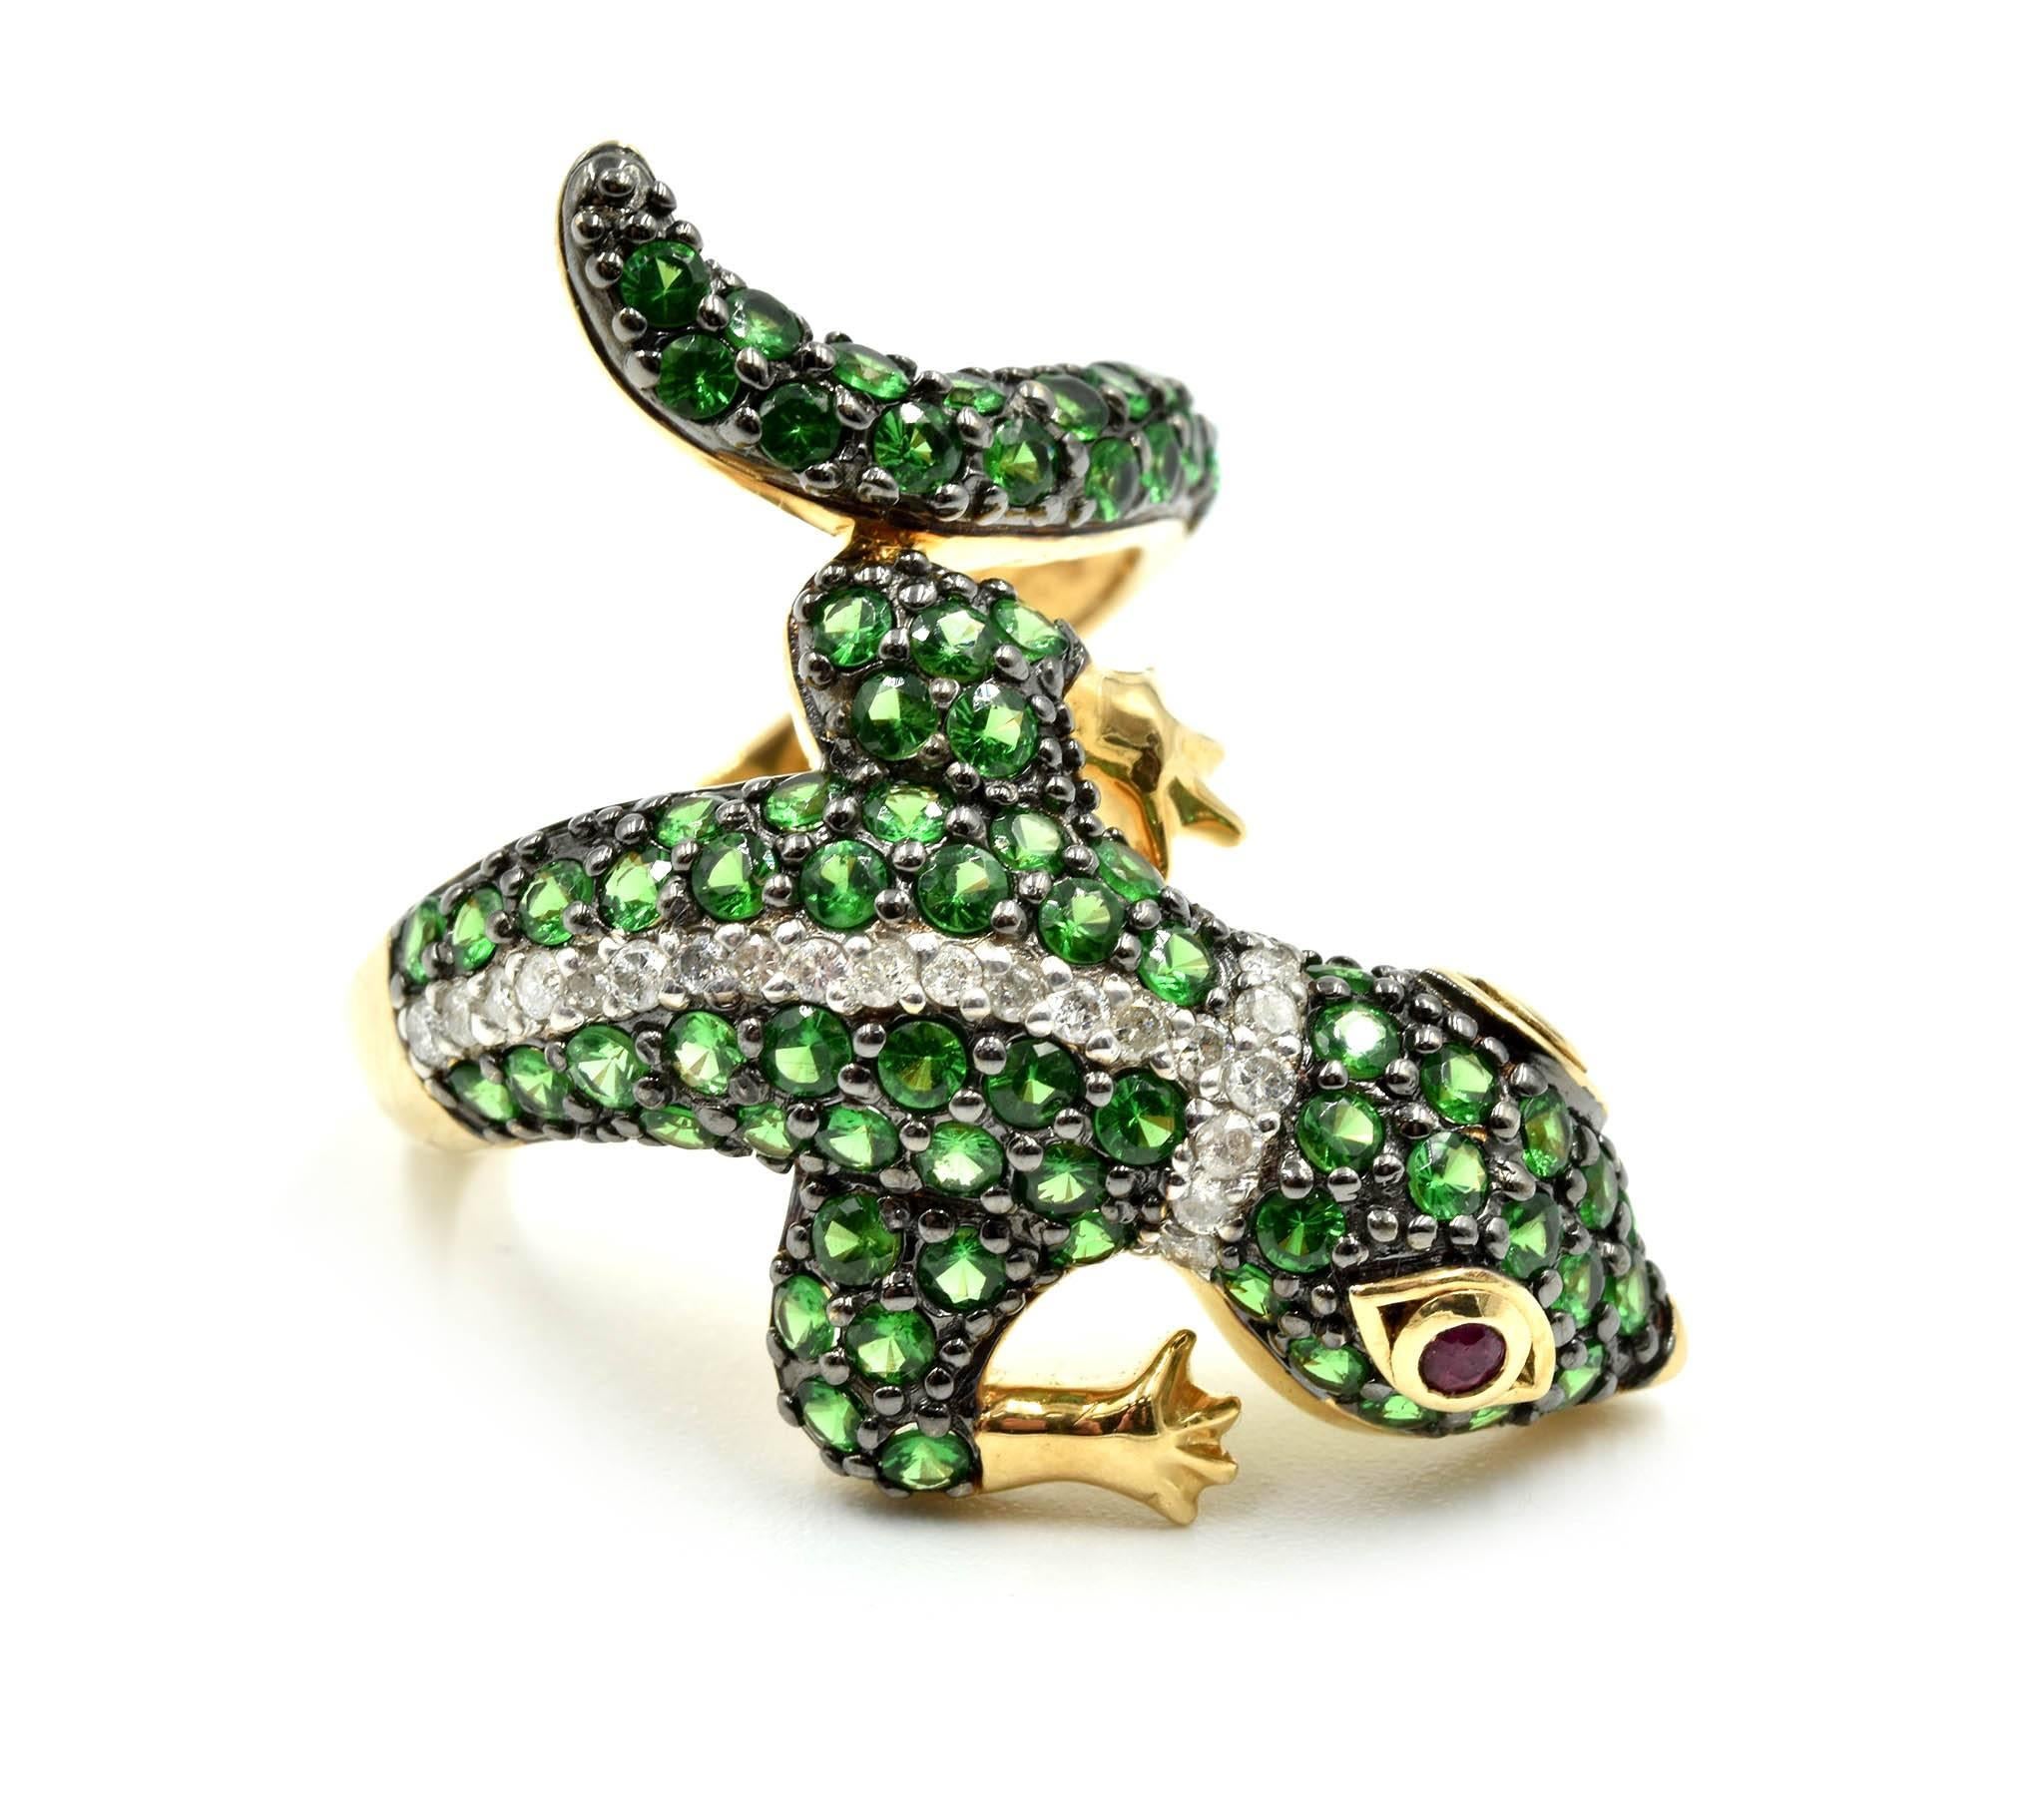 Designer: custom made
Material: 14k yellow gold 
Diamonds: 0.17 total carat weight
Tsavorites: 1.58 total carat weight
Rubies: 0.03 total carat weight
Dimensions: top of ring is 32mm long
Ring size: ring size is 8 currently, allow two extra shipping